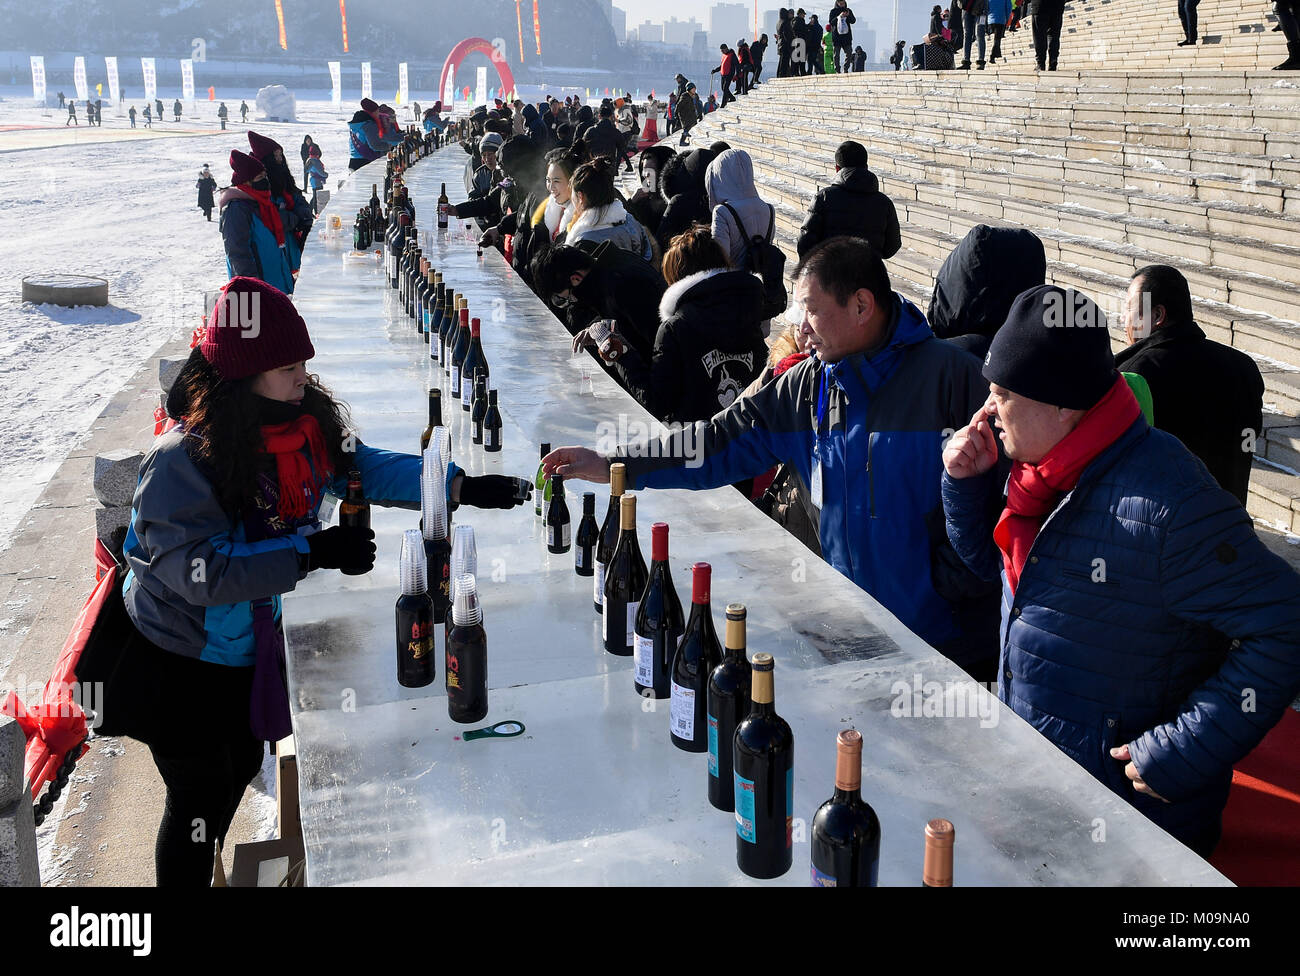 Tonghua, China's Jilin Province. 20th Jan, 2018. Citizens taste wine in front of an ice bar table at the bank of Hunjiang river in Tonghua, northeast China's Jilin Province, Jan. 20, 2018. A 2221.7-square-meter snow picture and a 100.6-meter-long ice bar table were seen recently in the city. Credit: Xu Chang/Xinhua/Alamy Live News Stock Photo